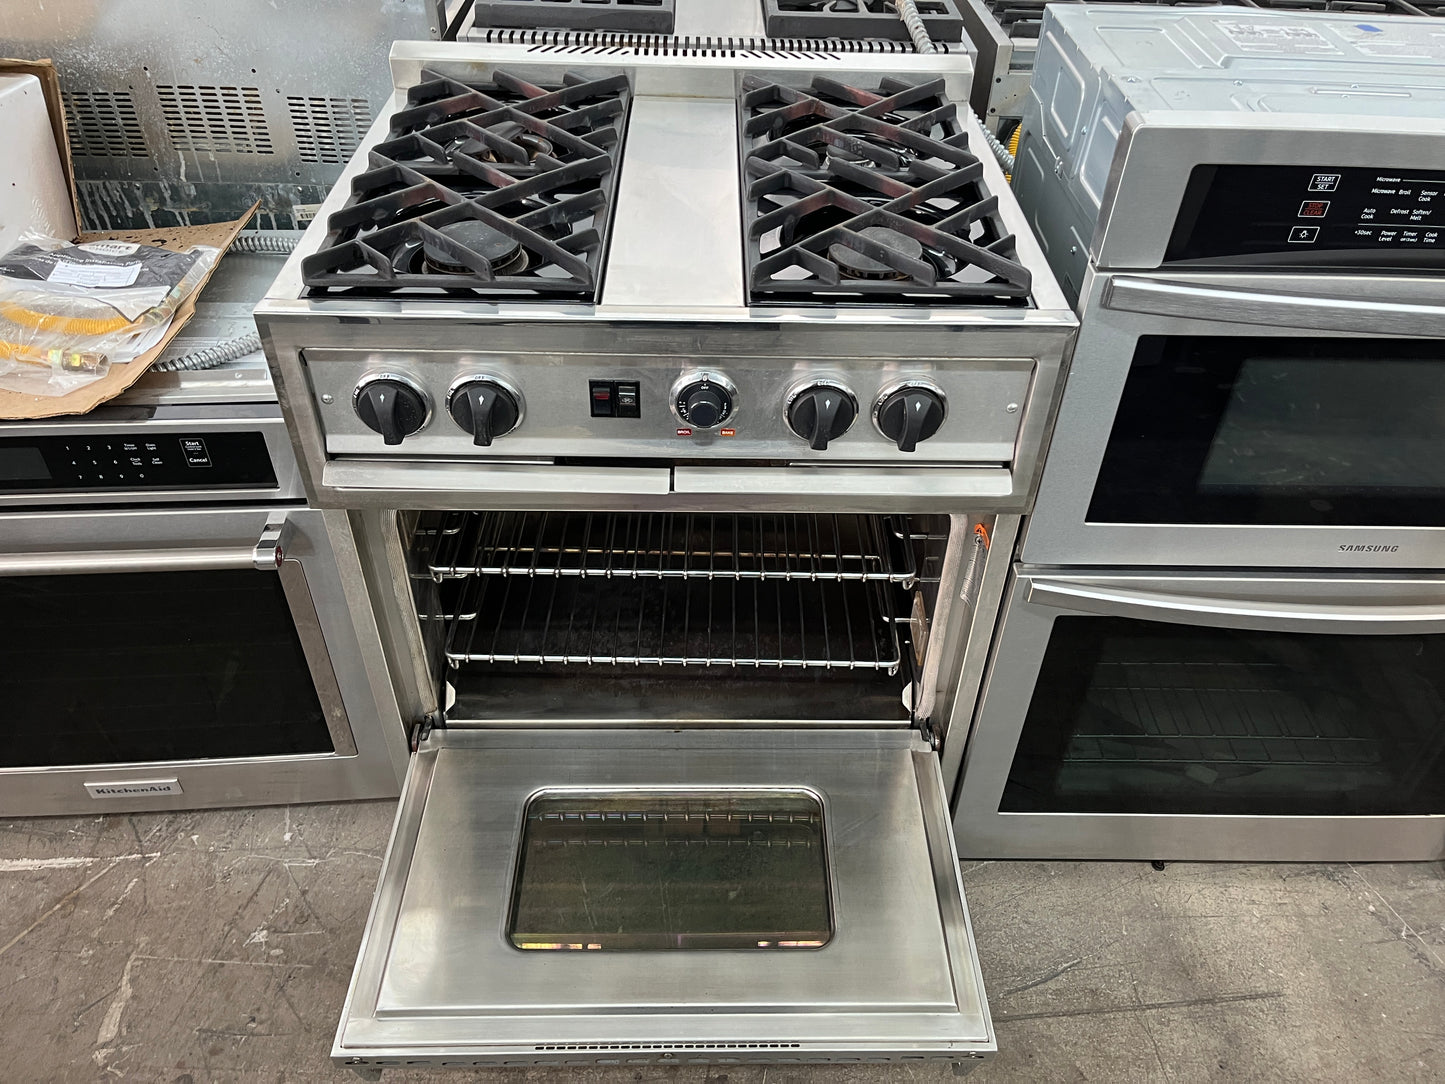 30 Inch Jade Commercial Natural Gas 4 burner Range with Convection Oven in Stainless Steel , RJGR3070A, 369345